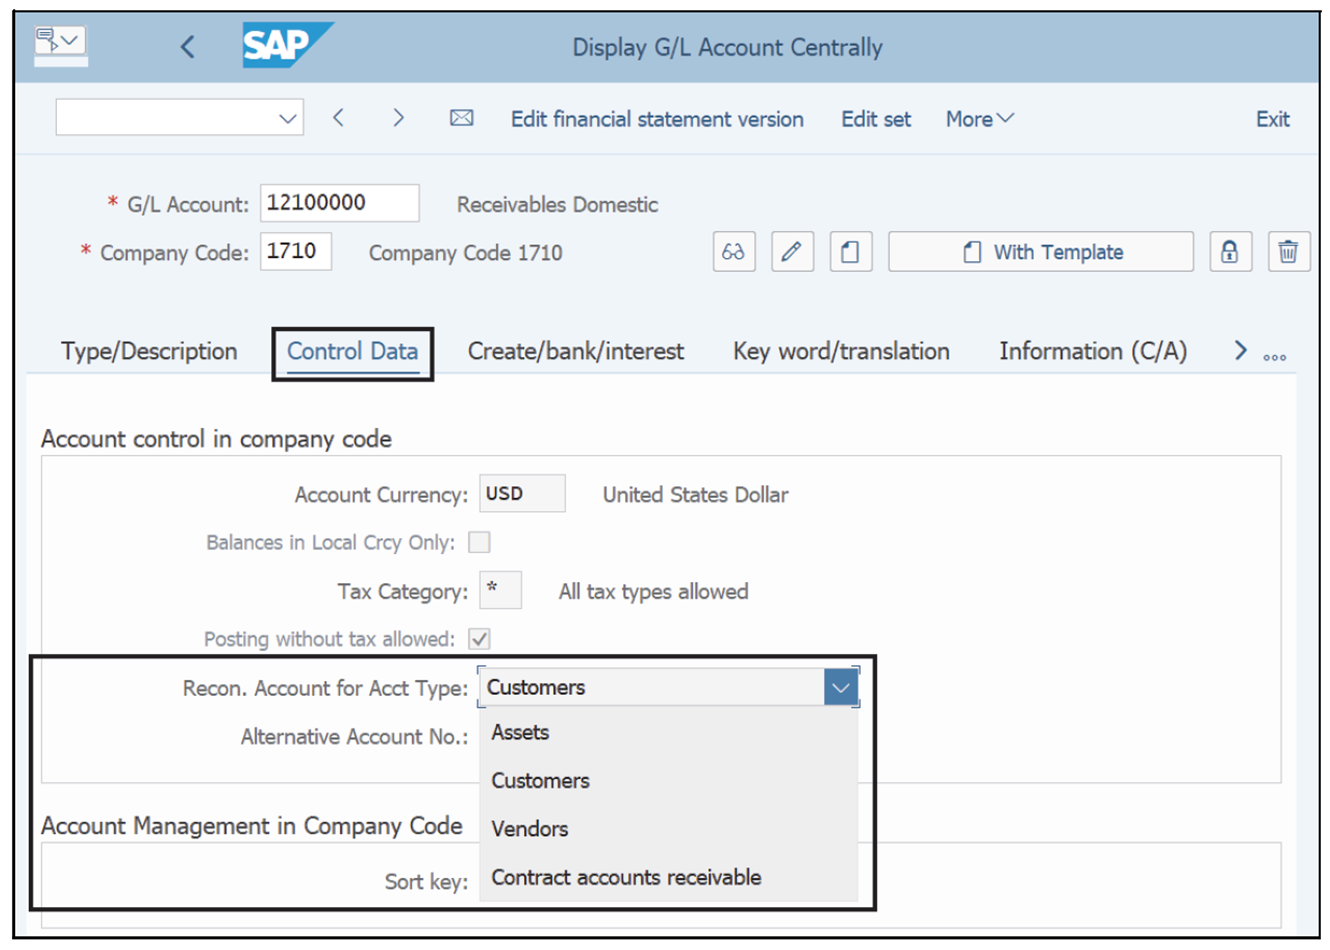 Control Data to Specify Reconciliation Account Type